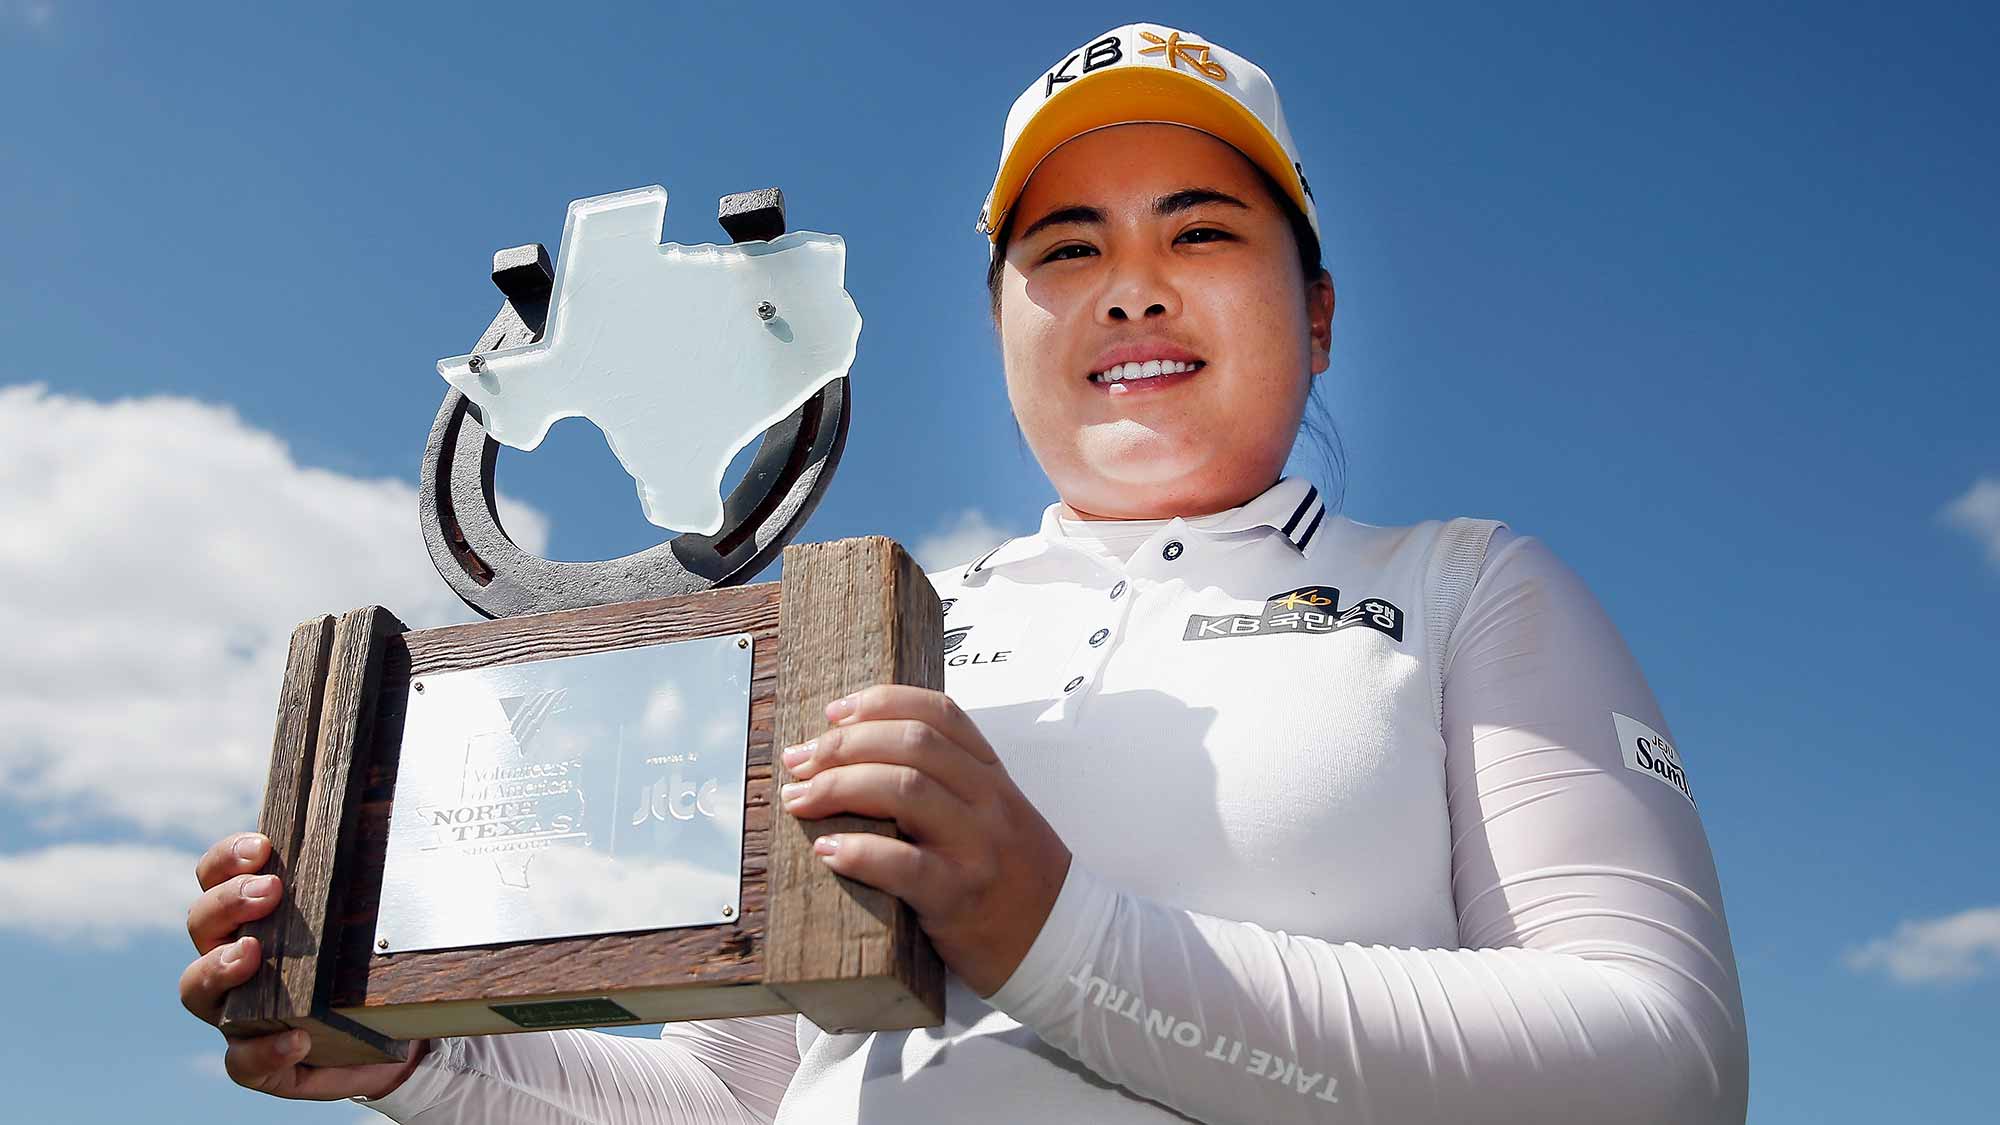  Inbee Park of South Korea poses with the trophy after winning the Final Round of the 2015 Volunteers of America North Texas Shootout Presented by JTBC